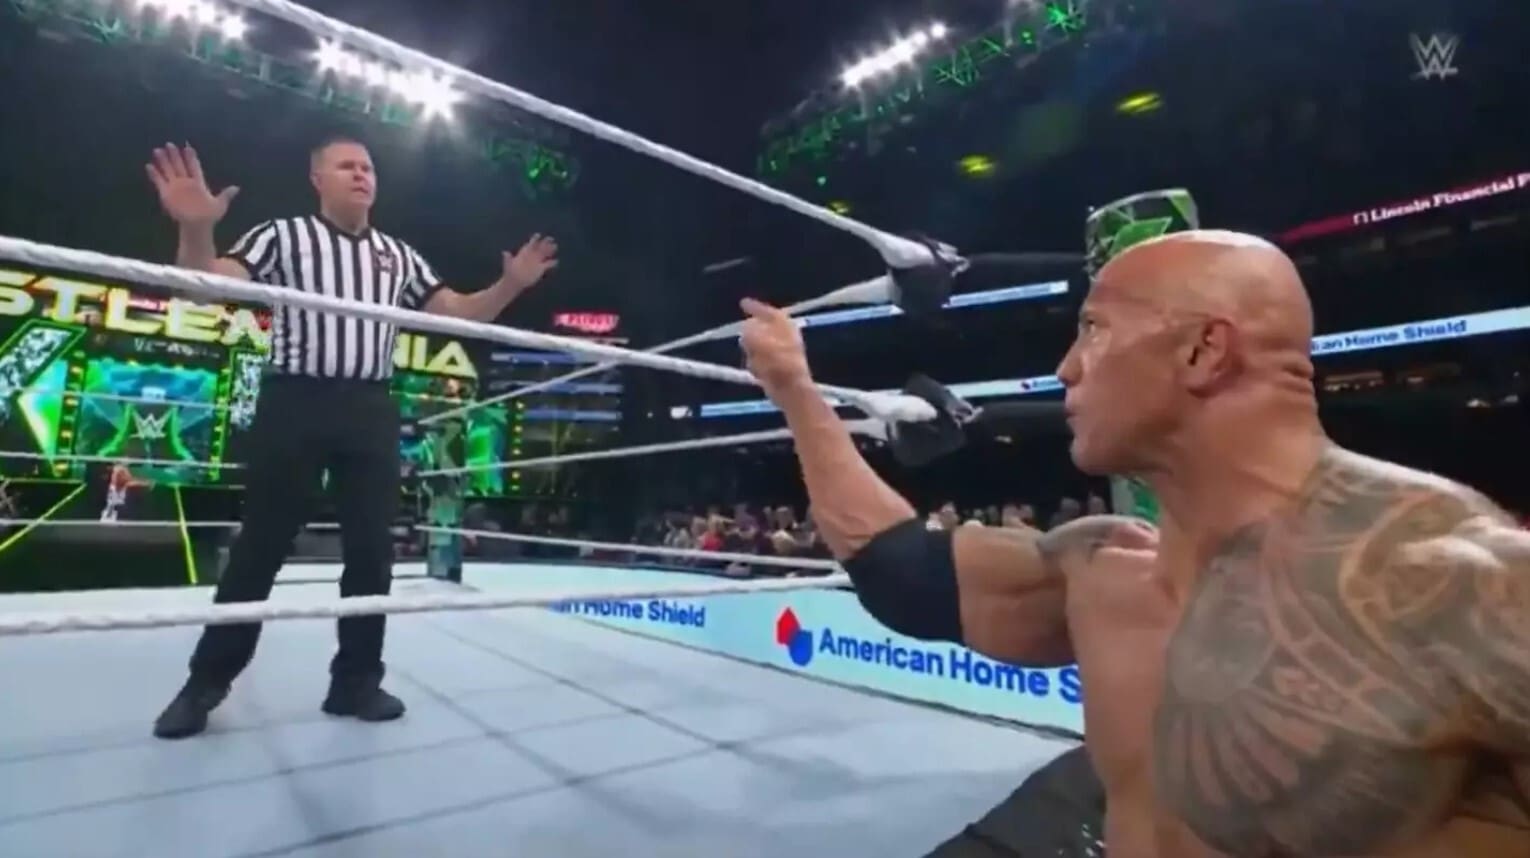 The Rock Broke Major WWE Protocol at WrestleMania, Forced Broadcast to Mute Live Event